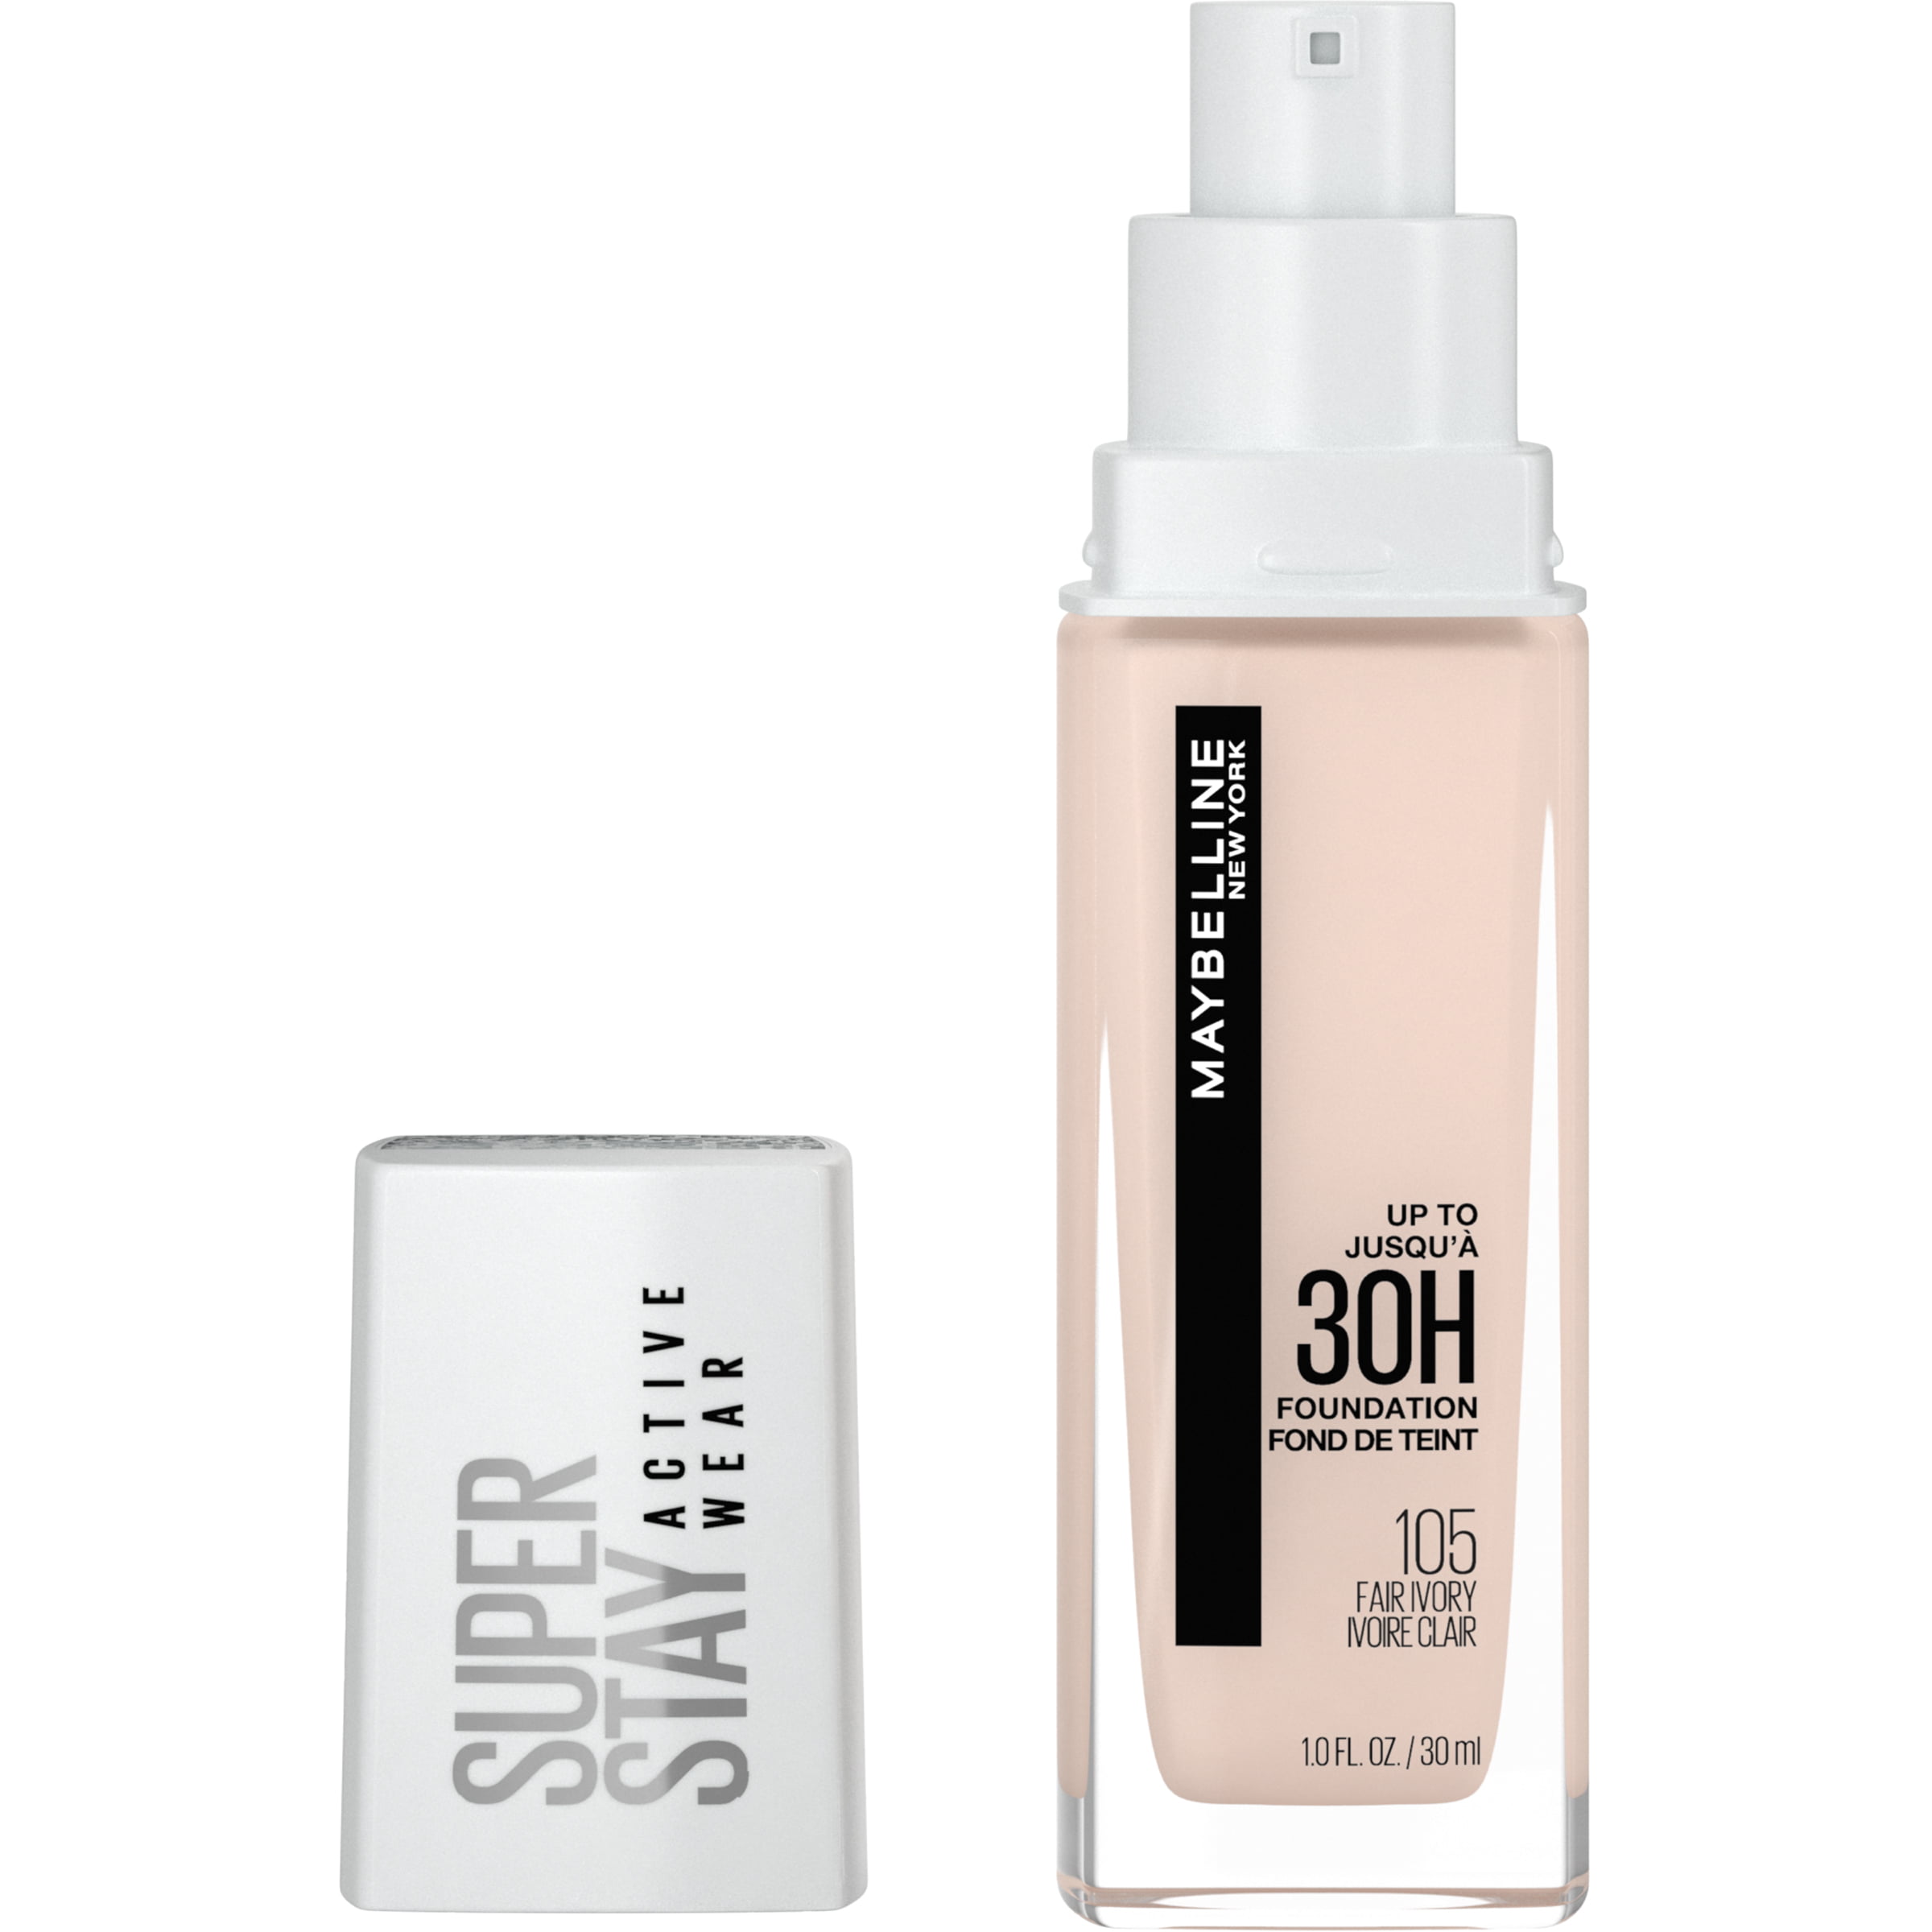 Maybelline Super Stay Liquid Foundation Makeup, Full Coverage, 105 Fair Ivory, 1 fl oz - image 1 of 10